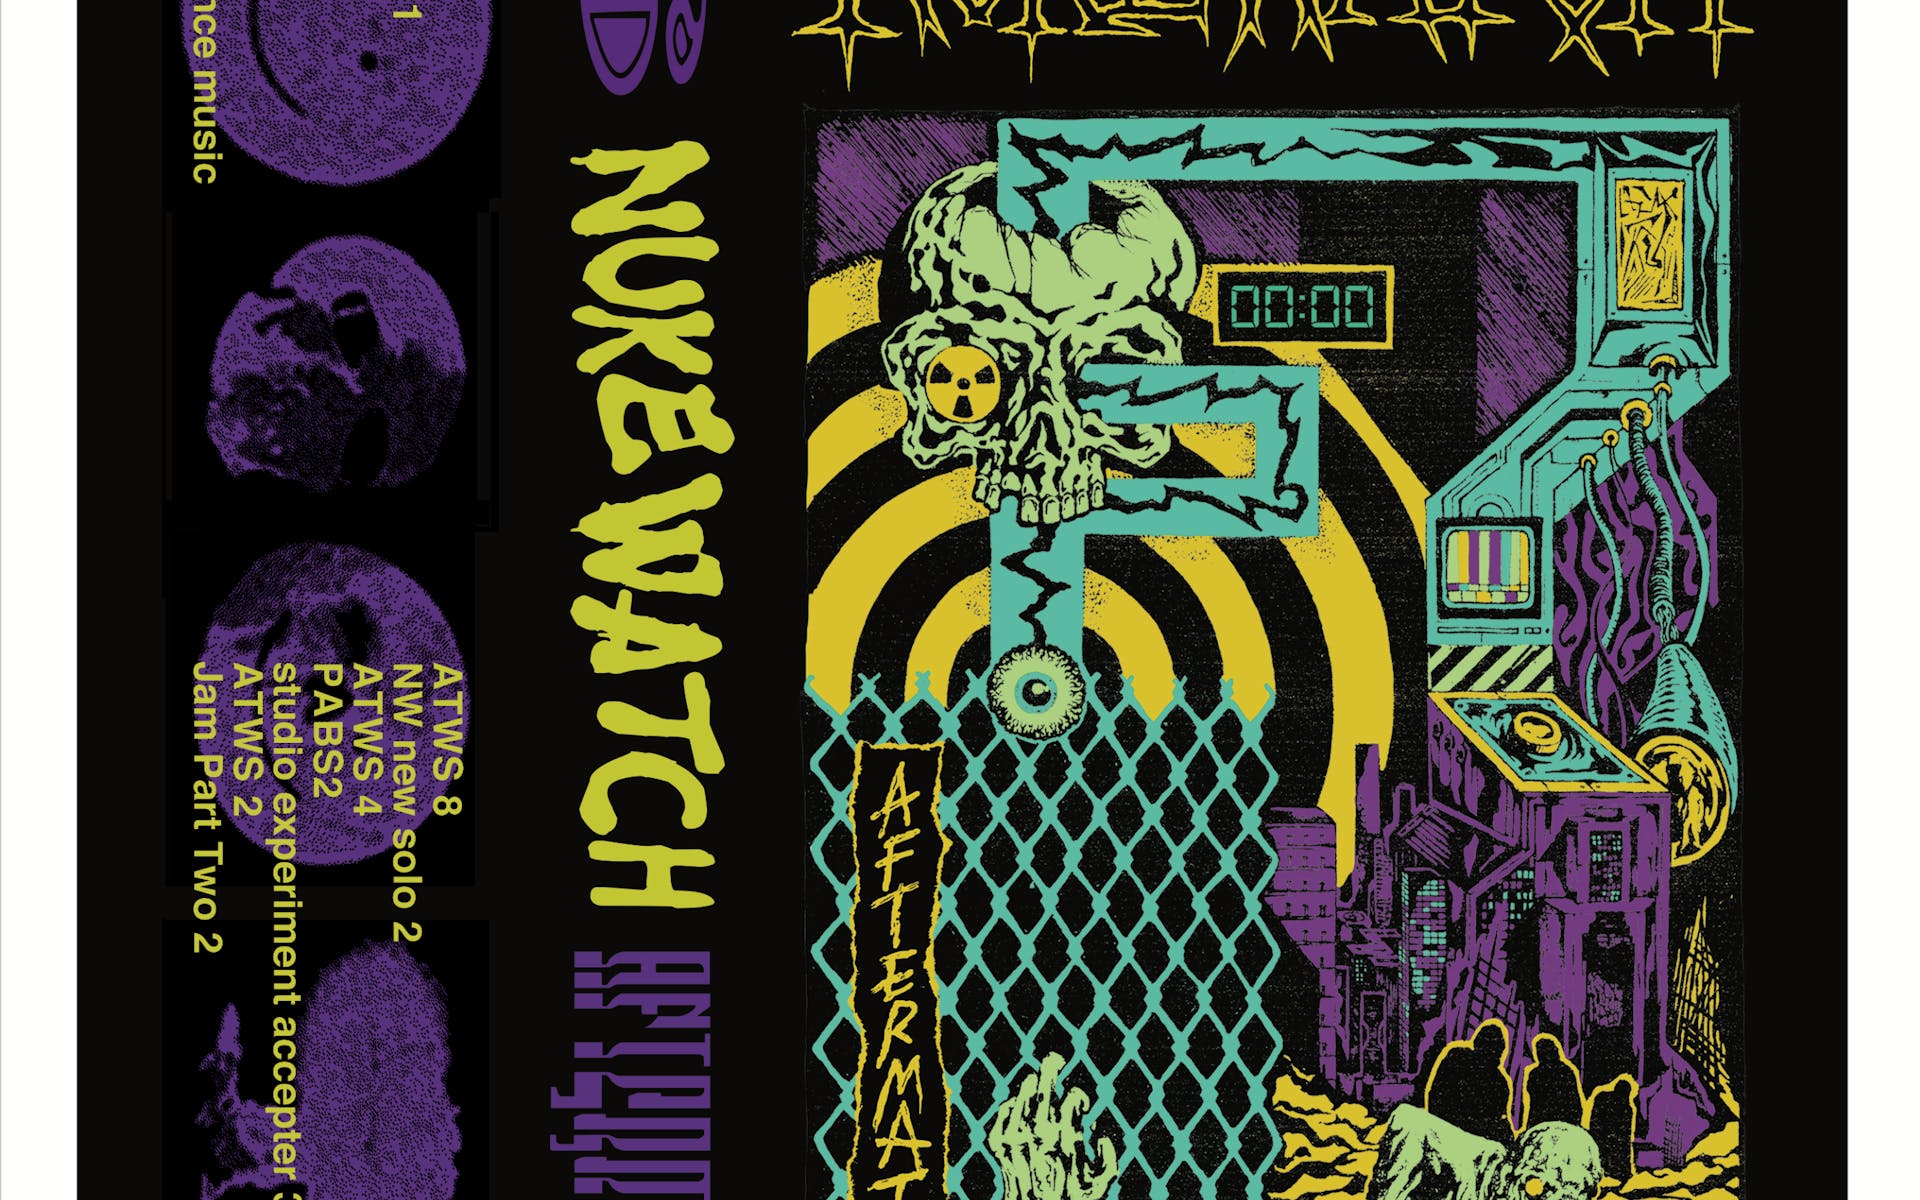 Layout of front, spine, and back of a cassette tape insert, featuring illustrations and distorted typography